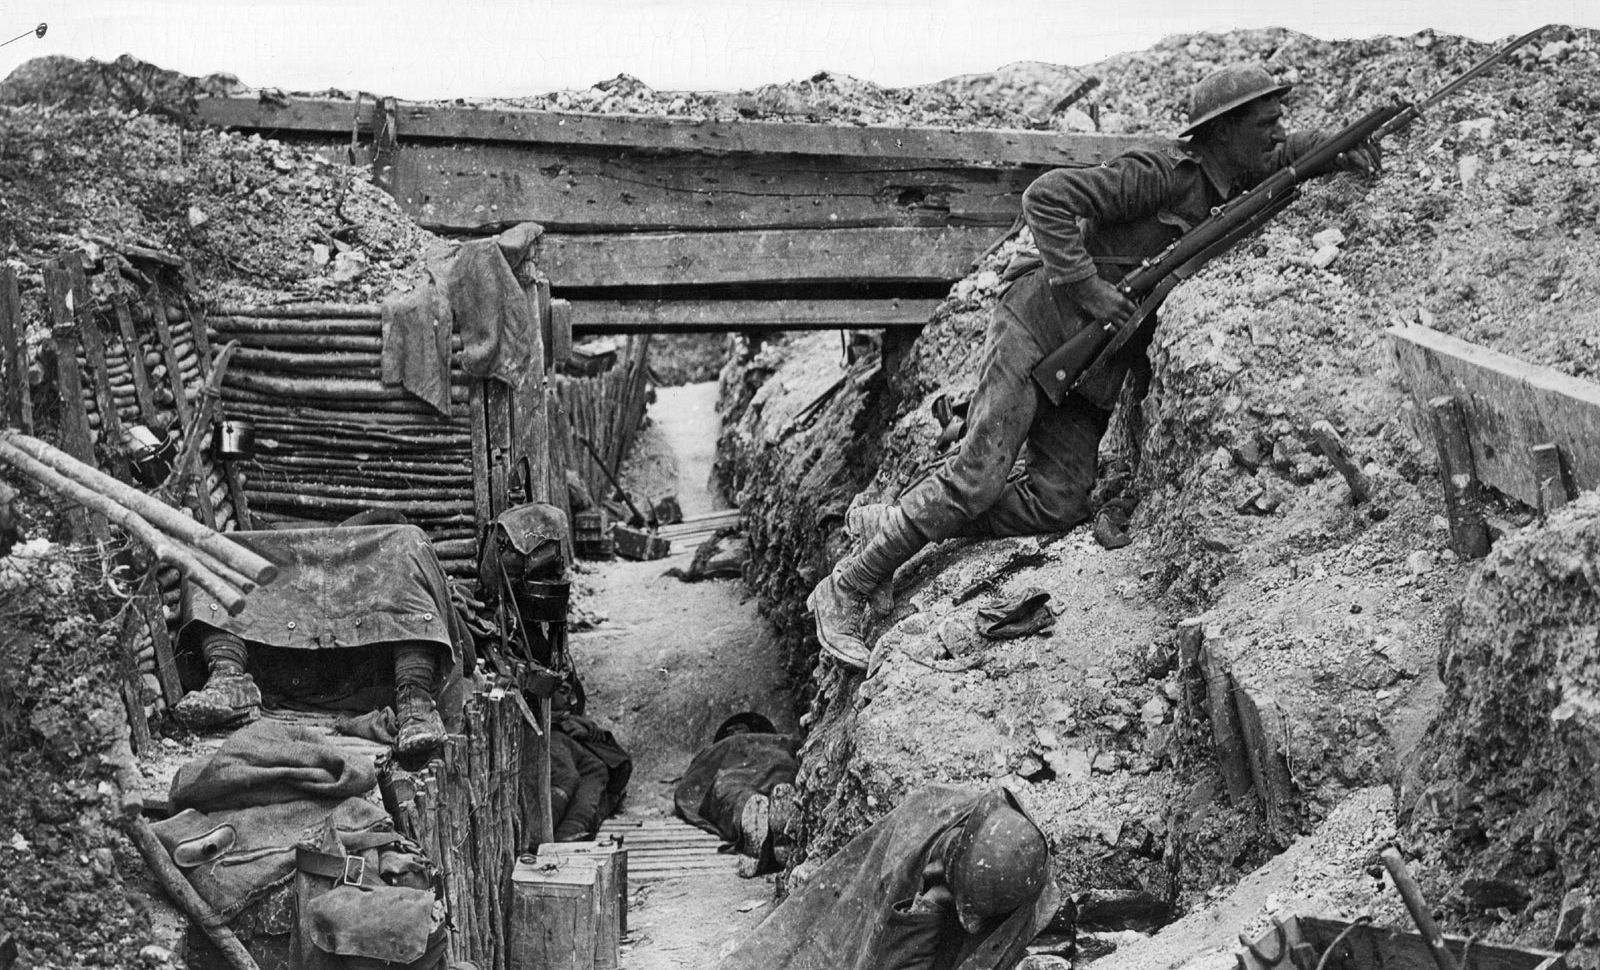 A photo of a British trench. One soldier is peeking over the edge. The trench conditions look grim and dirty